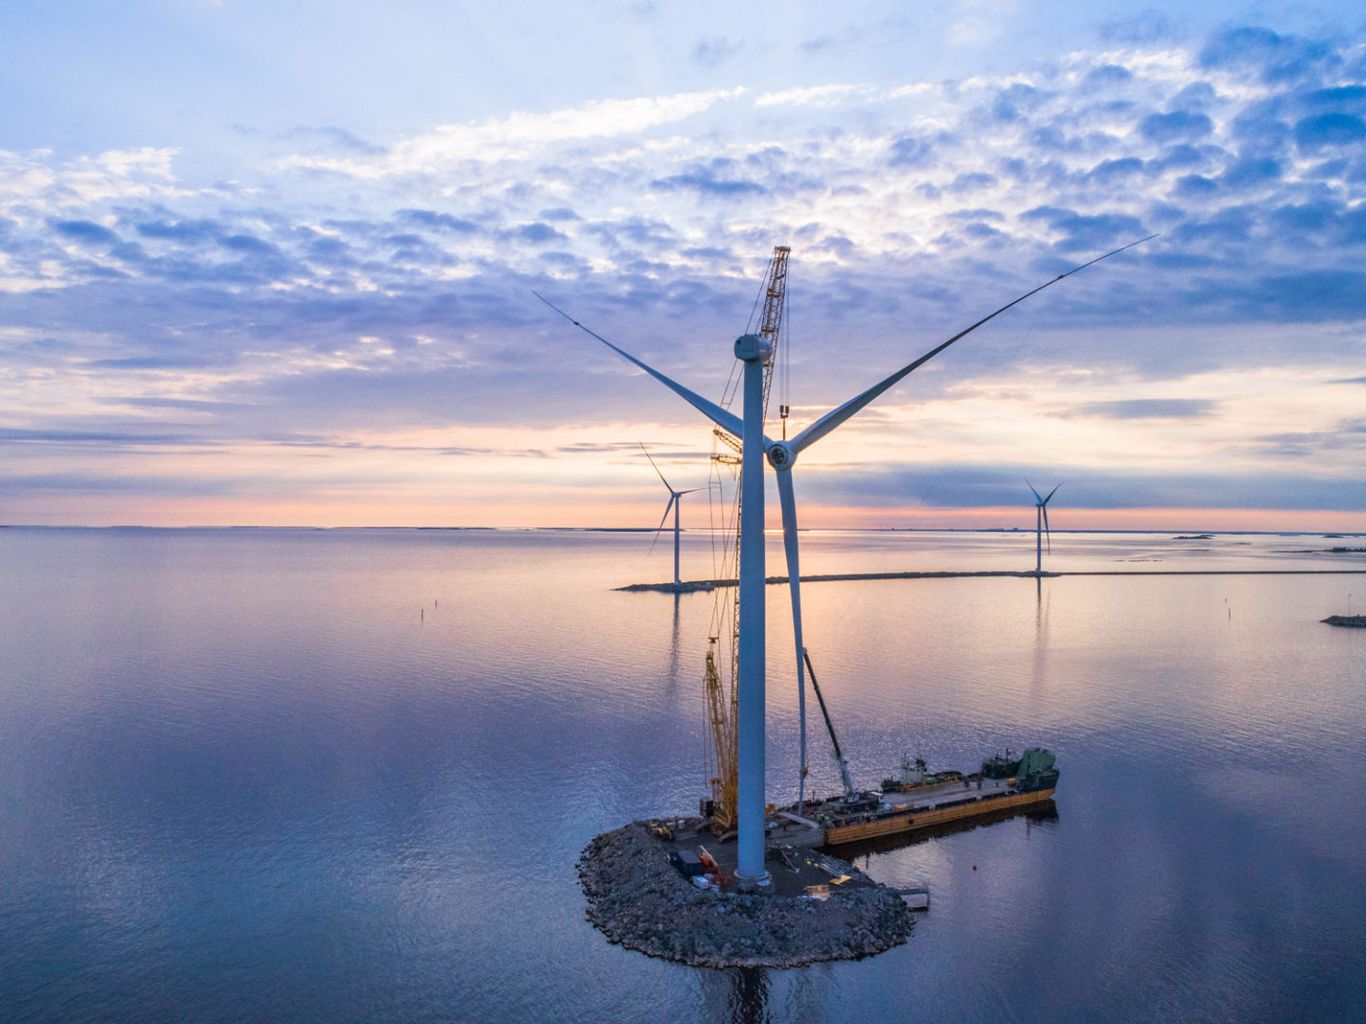 🇸🇪 OX2 receives permission to build 400 MW offshore wind power on the west coast of Sweden